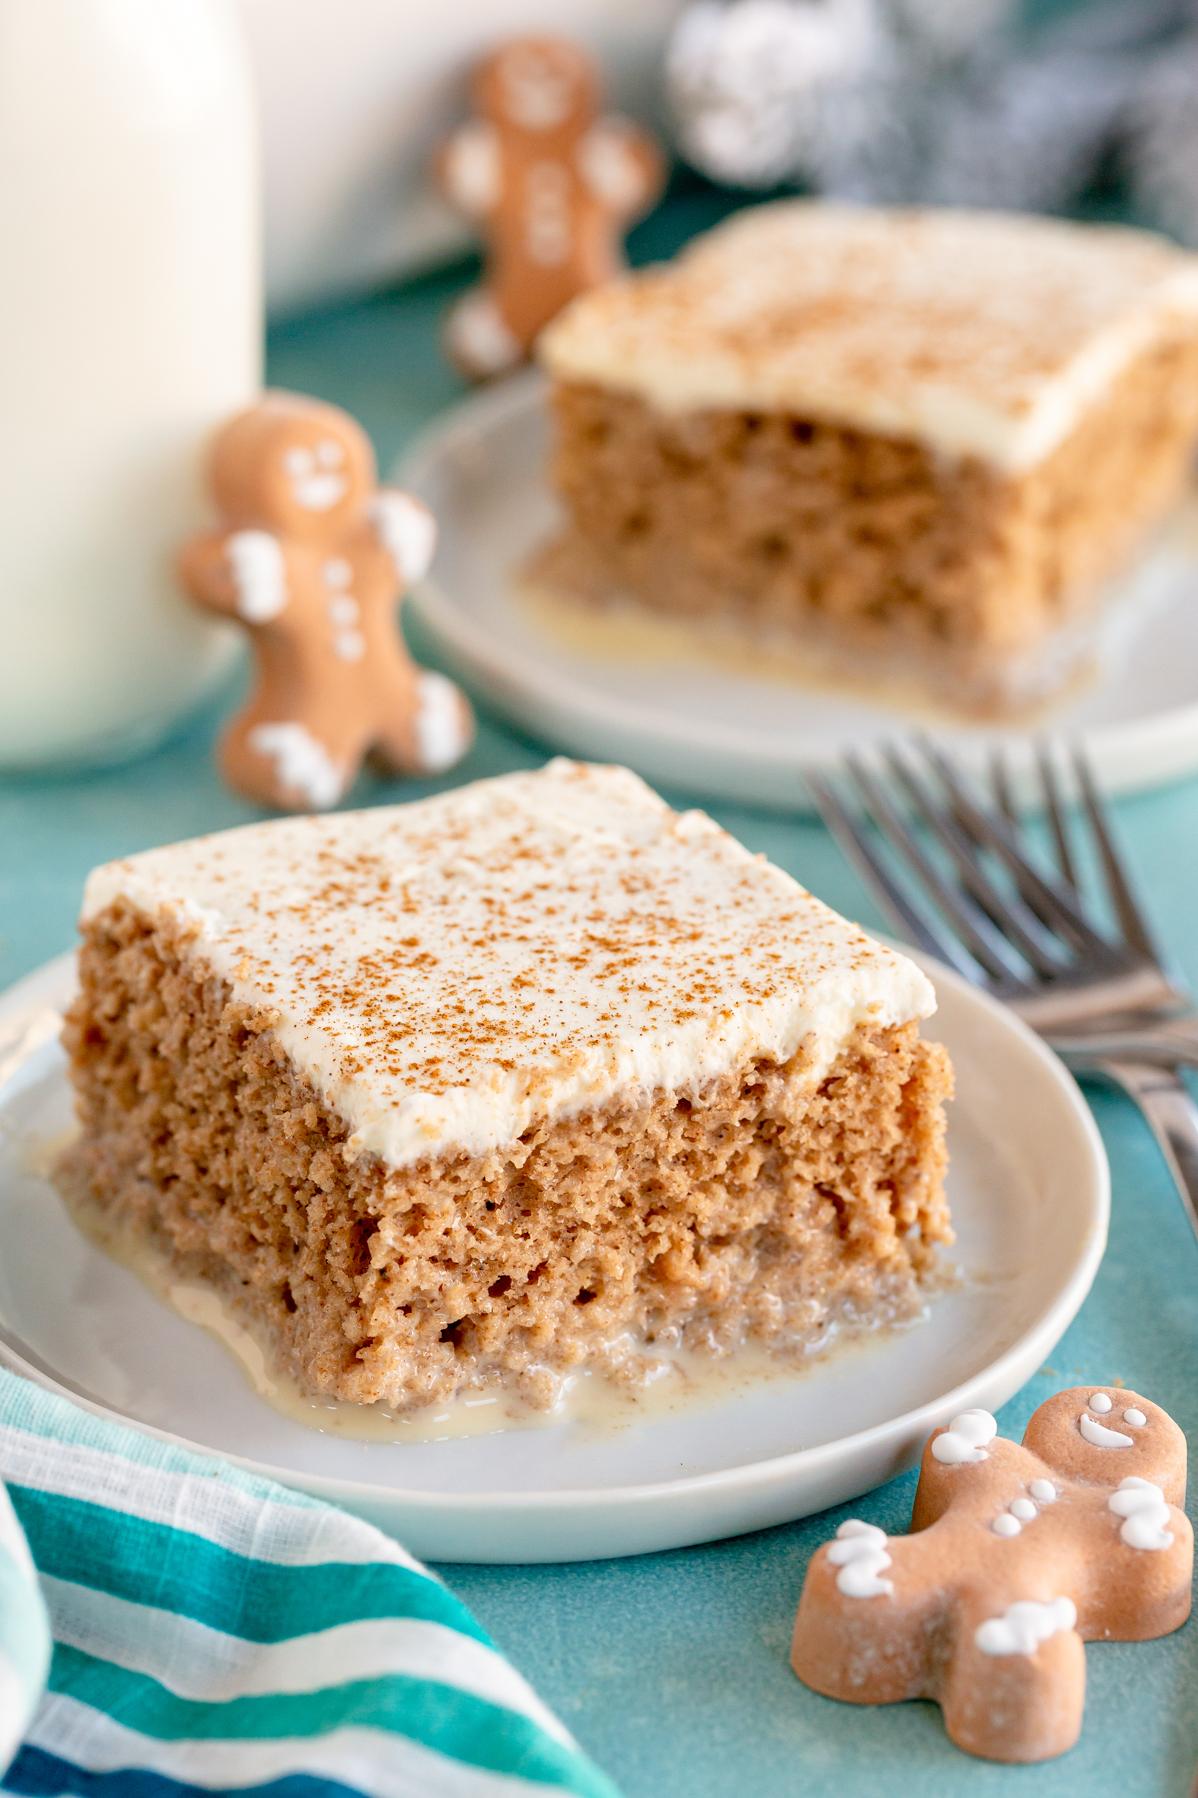  A heavenly slice of Gingerbread Tres Leches Cake waiting for you